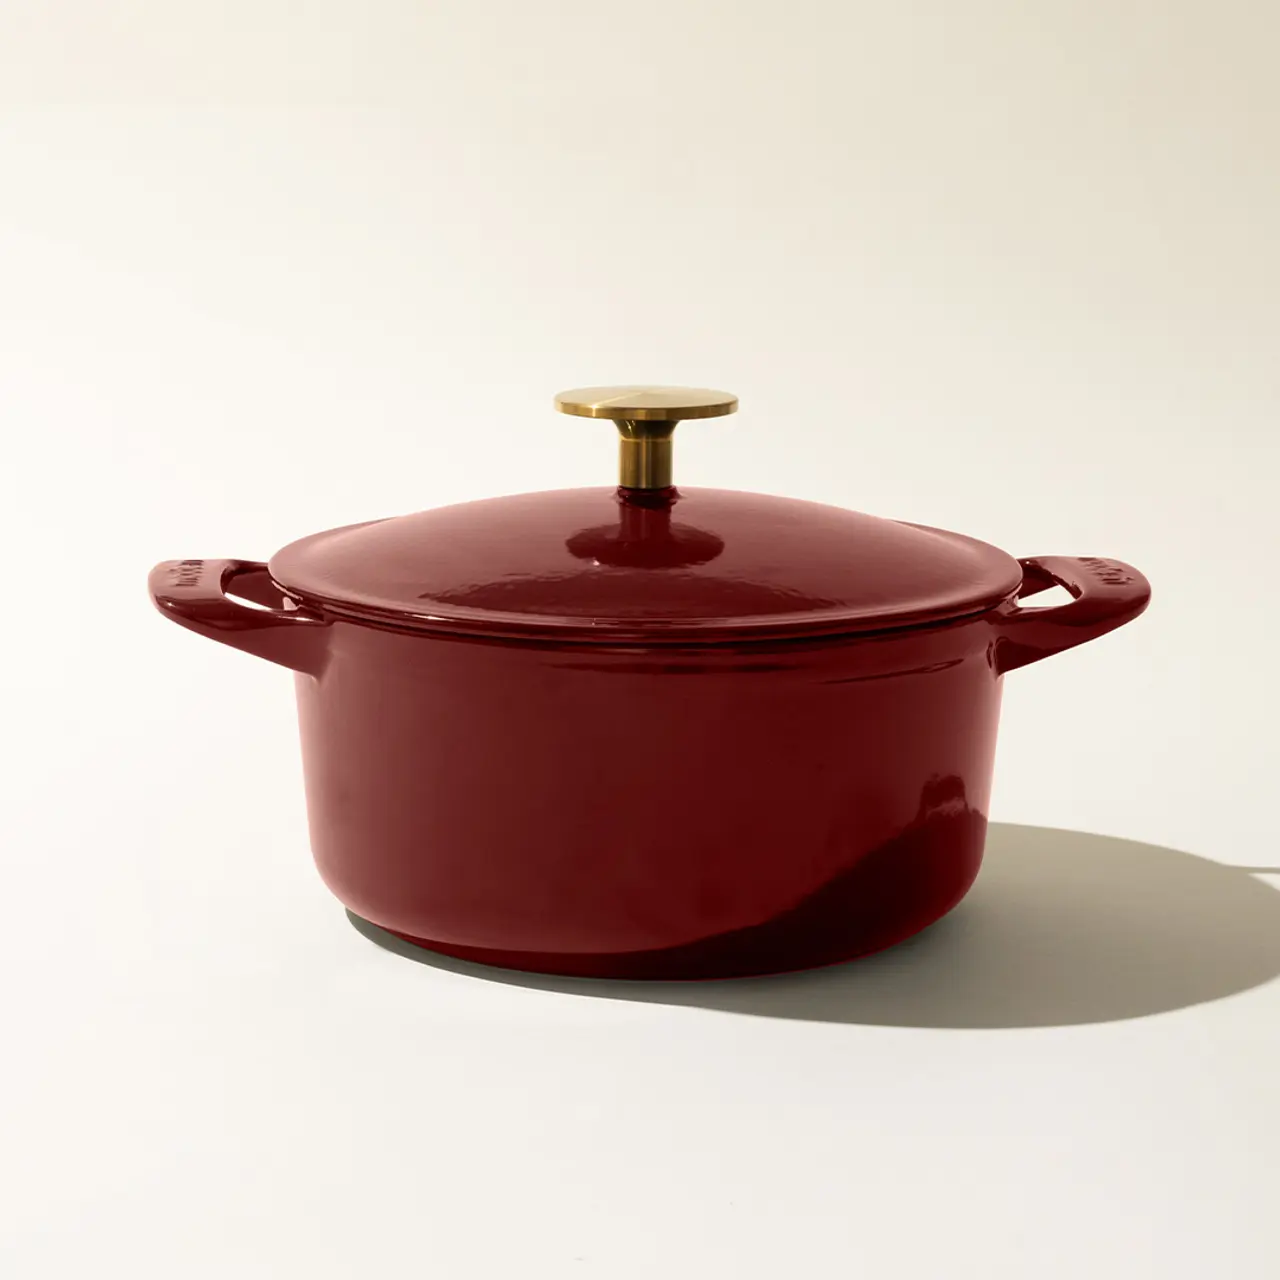 A red enameled cast iron Dutch oven with a gold-tone knob on the lid, centered against a light background.